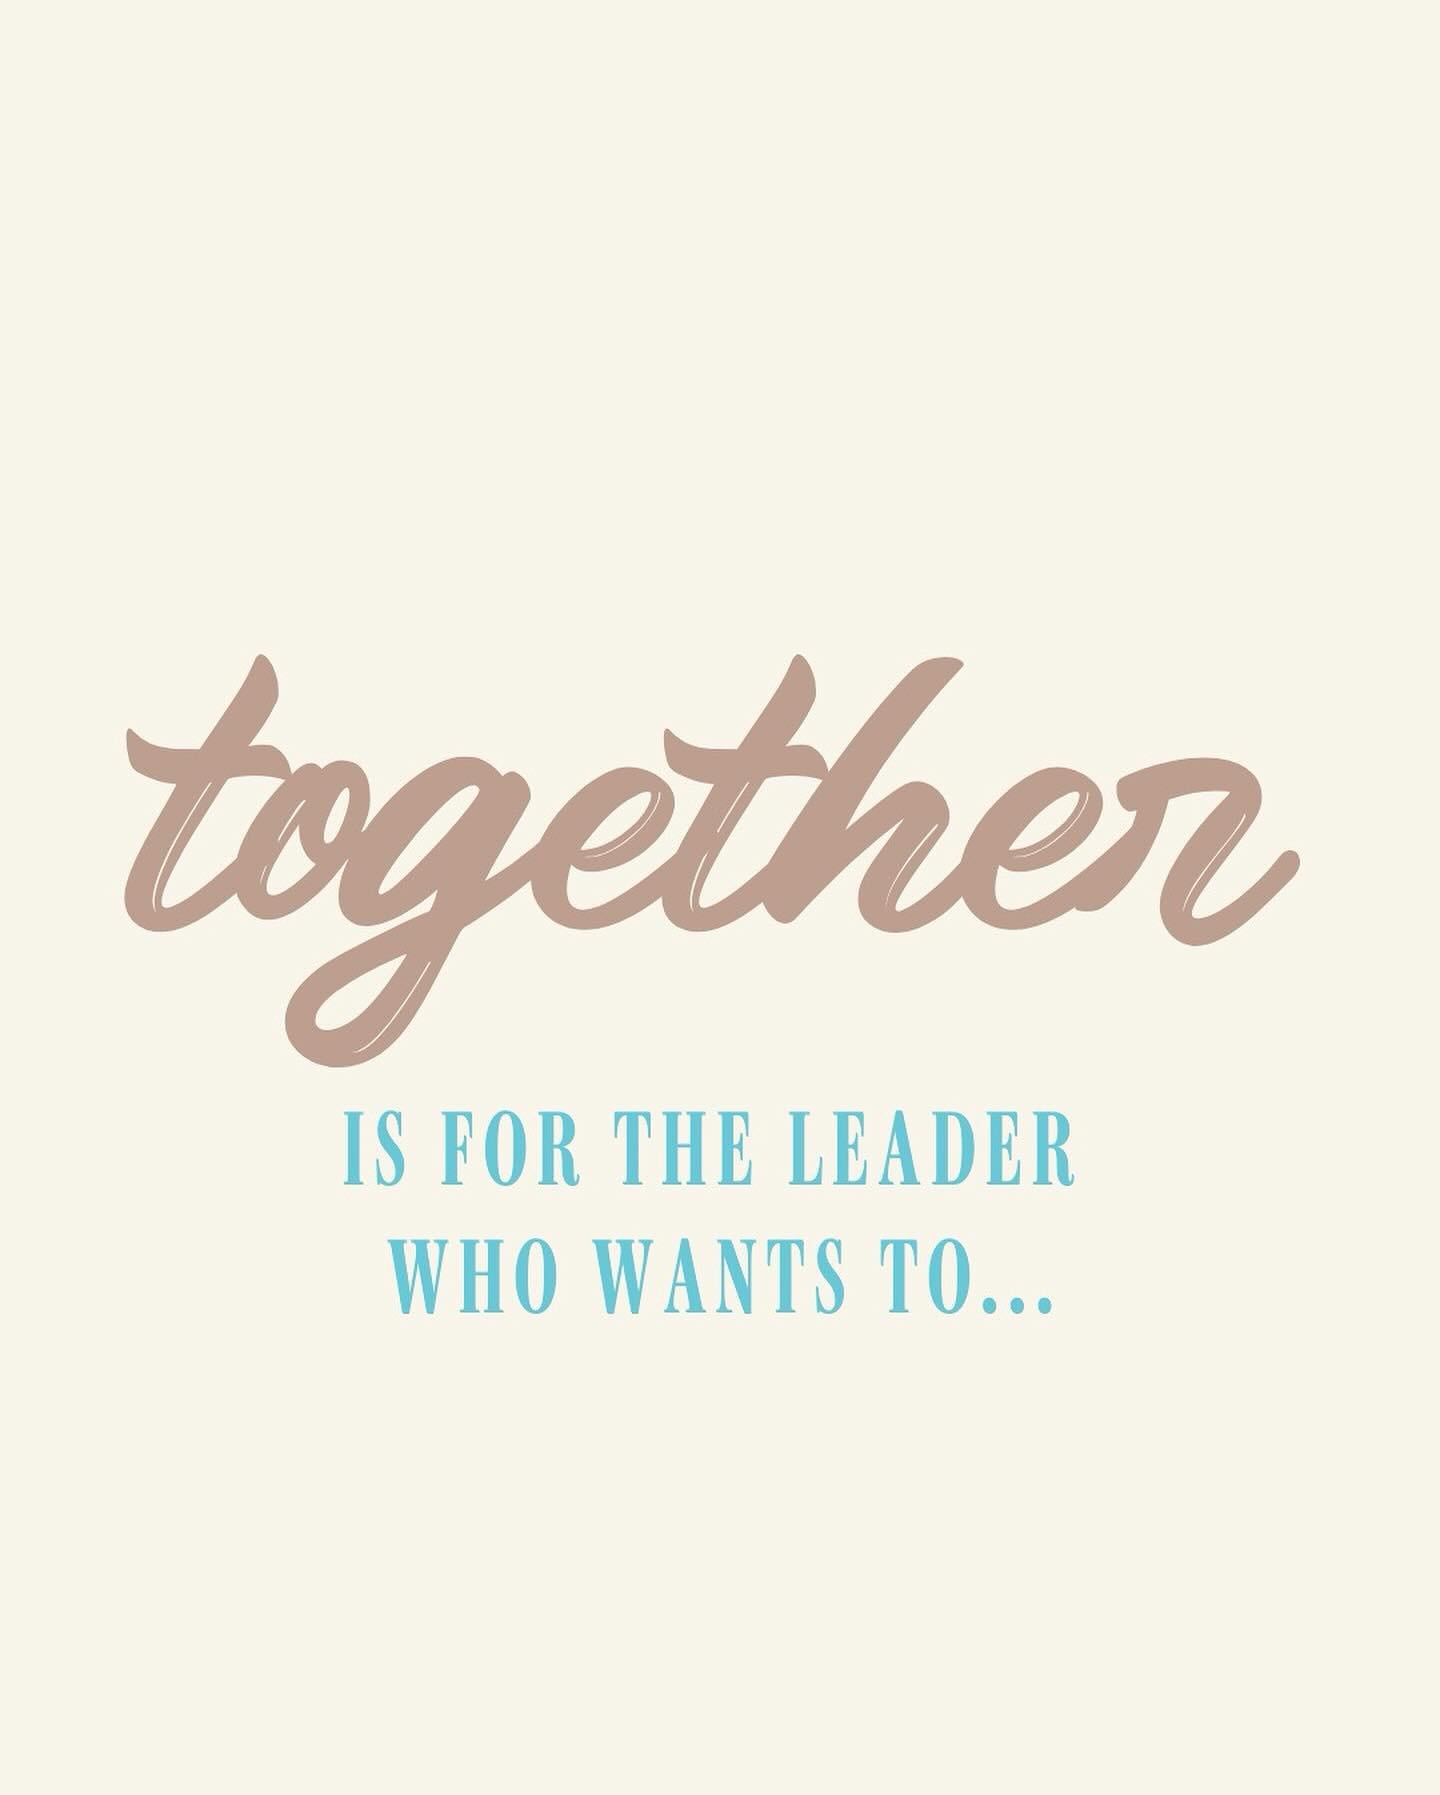 ⏰ The countdown is on! 
⠀⠀⠀⠀⠀⠀⠀⠀⠀
We&rsquo;re less than one week away from TOGETHER: A coaching group for growth minded leaders, closing. There are only 8 days left to jump in! 
⠀⠀⠀⠀⠀⠀⠀⠀⠀
We know first hand that leaders are lonely and crave authentic